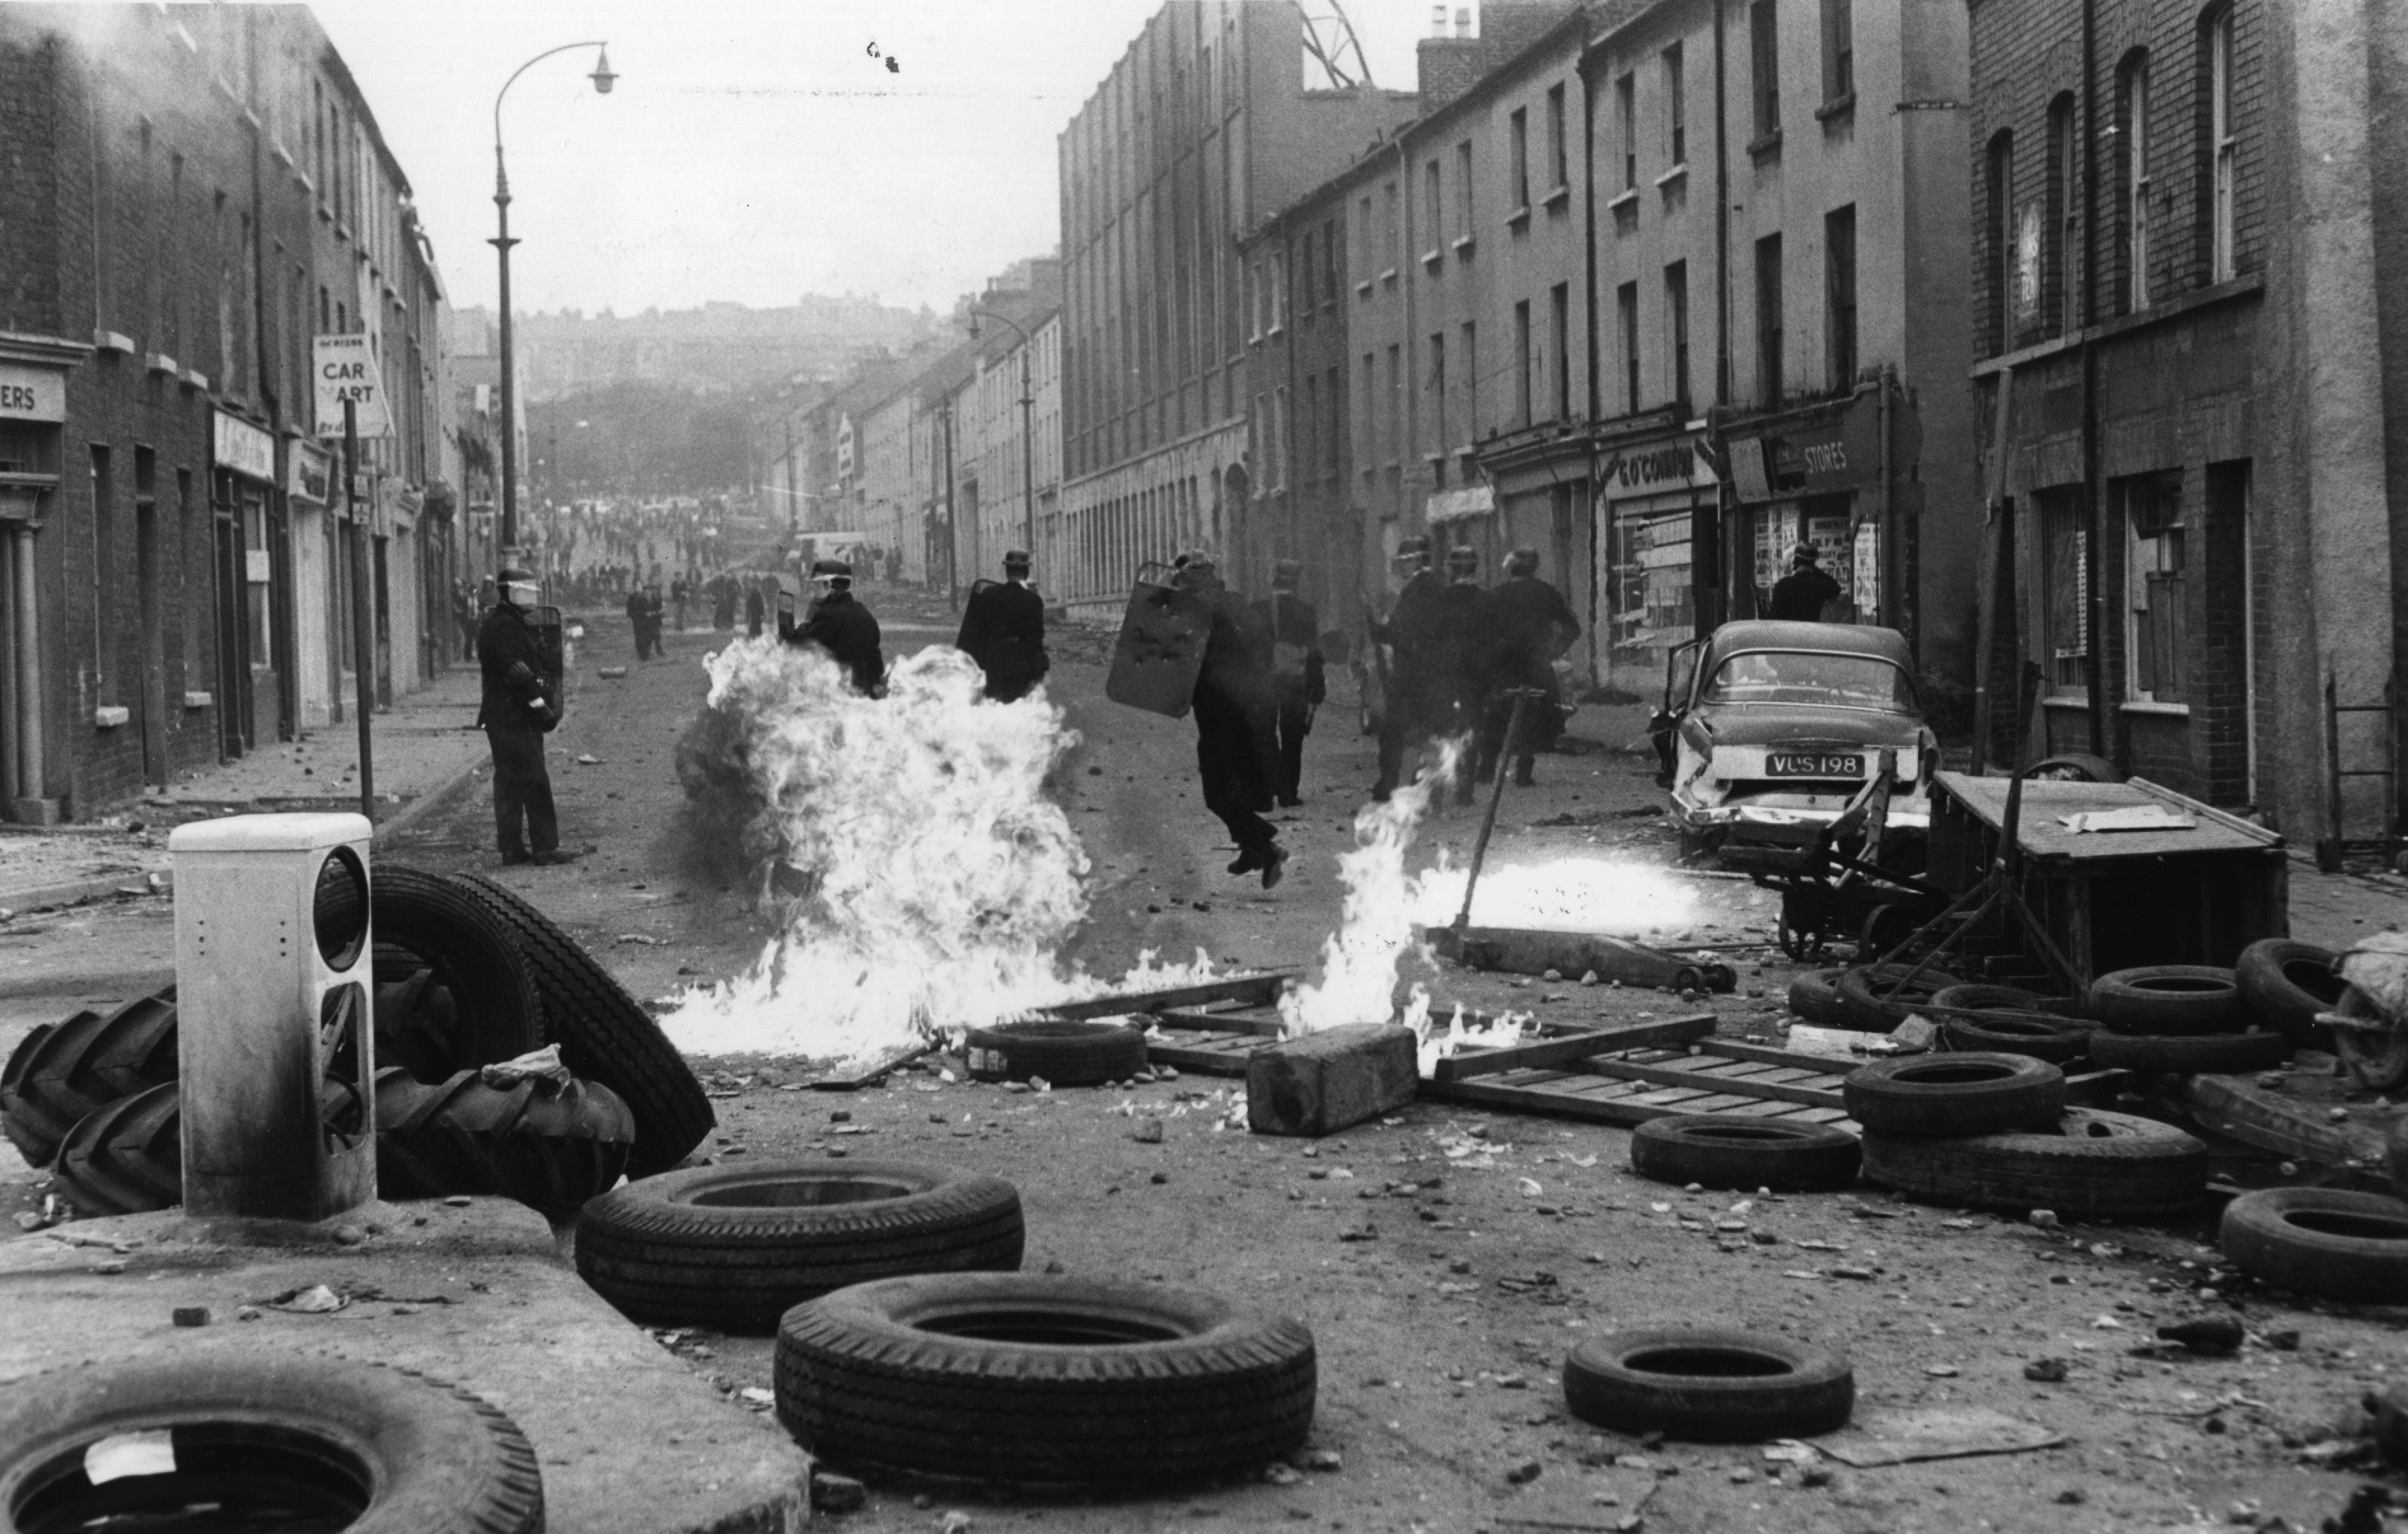 Northern Ireland 1960-1998: The Troubles in 15 photos | The Independent